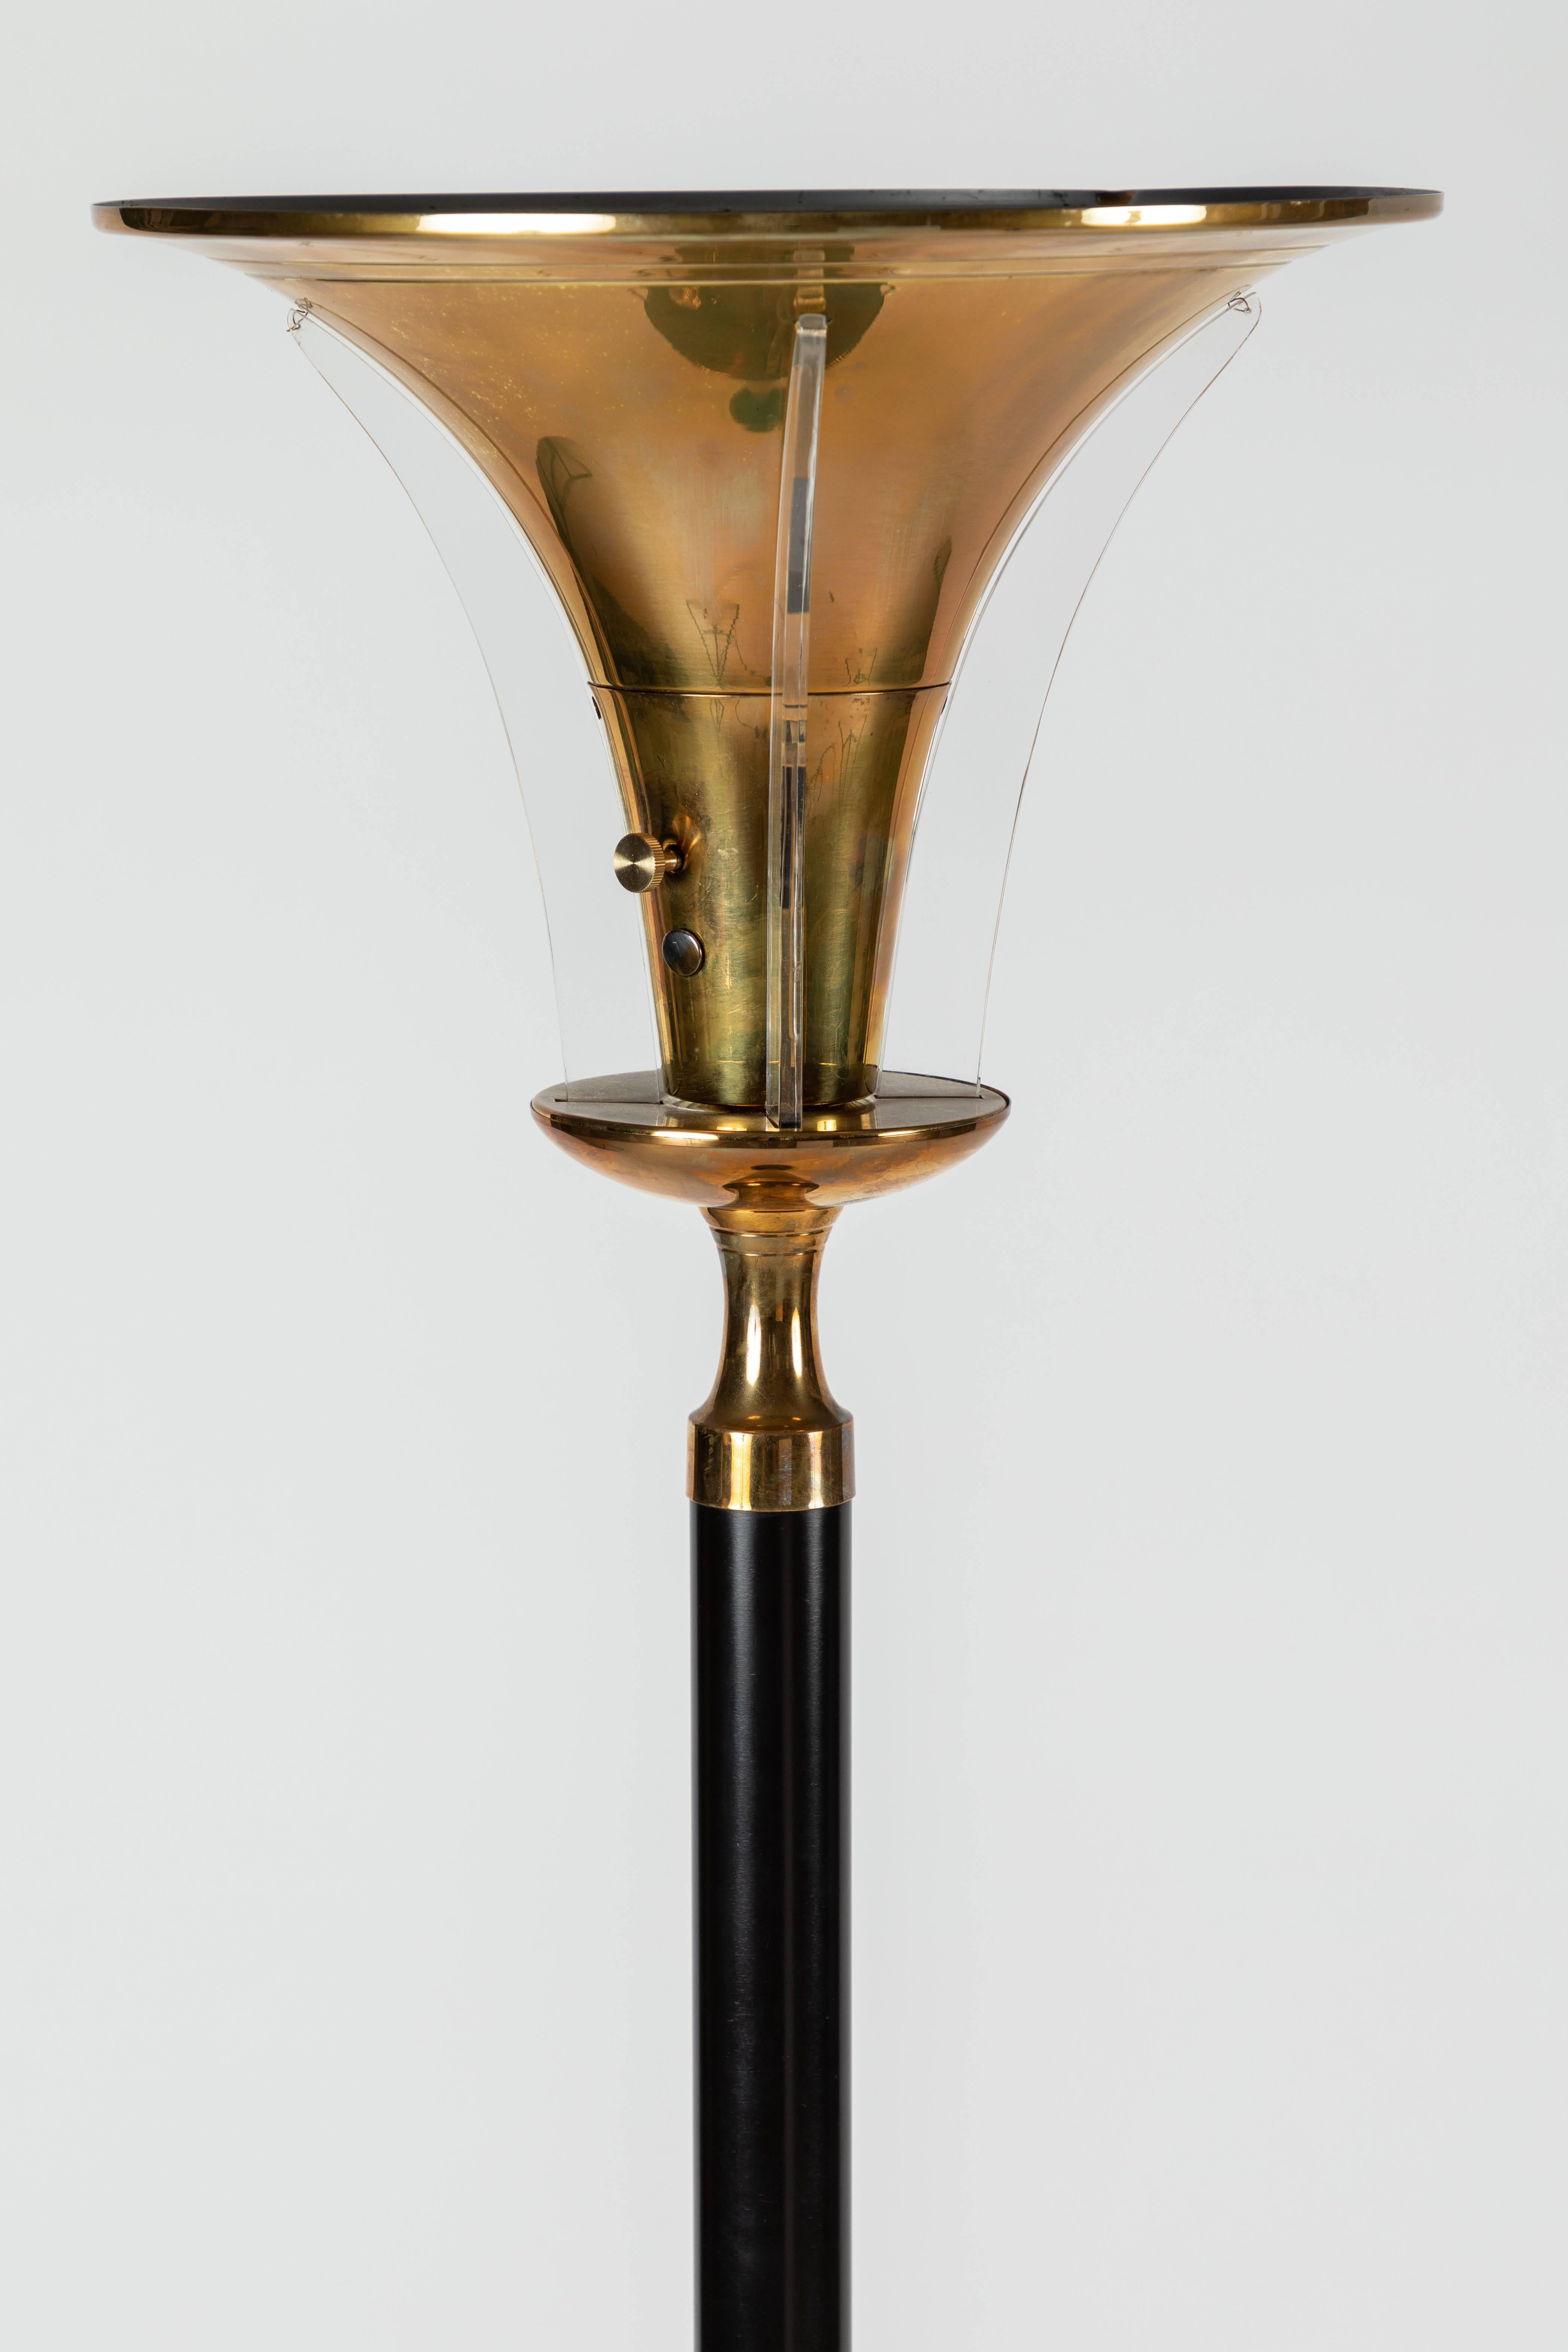 A pair of Art Deco floor lamps with organic, trumpet-shaped brass shades with piercings that allow the addition of Lucite fins to illuminate. 

Materials: spun aluminum with brass components and Lucite. 

Model number C5043 engraved at the